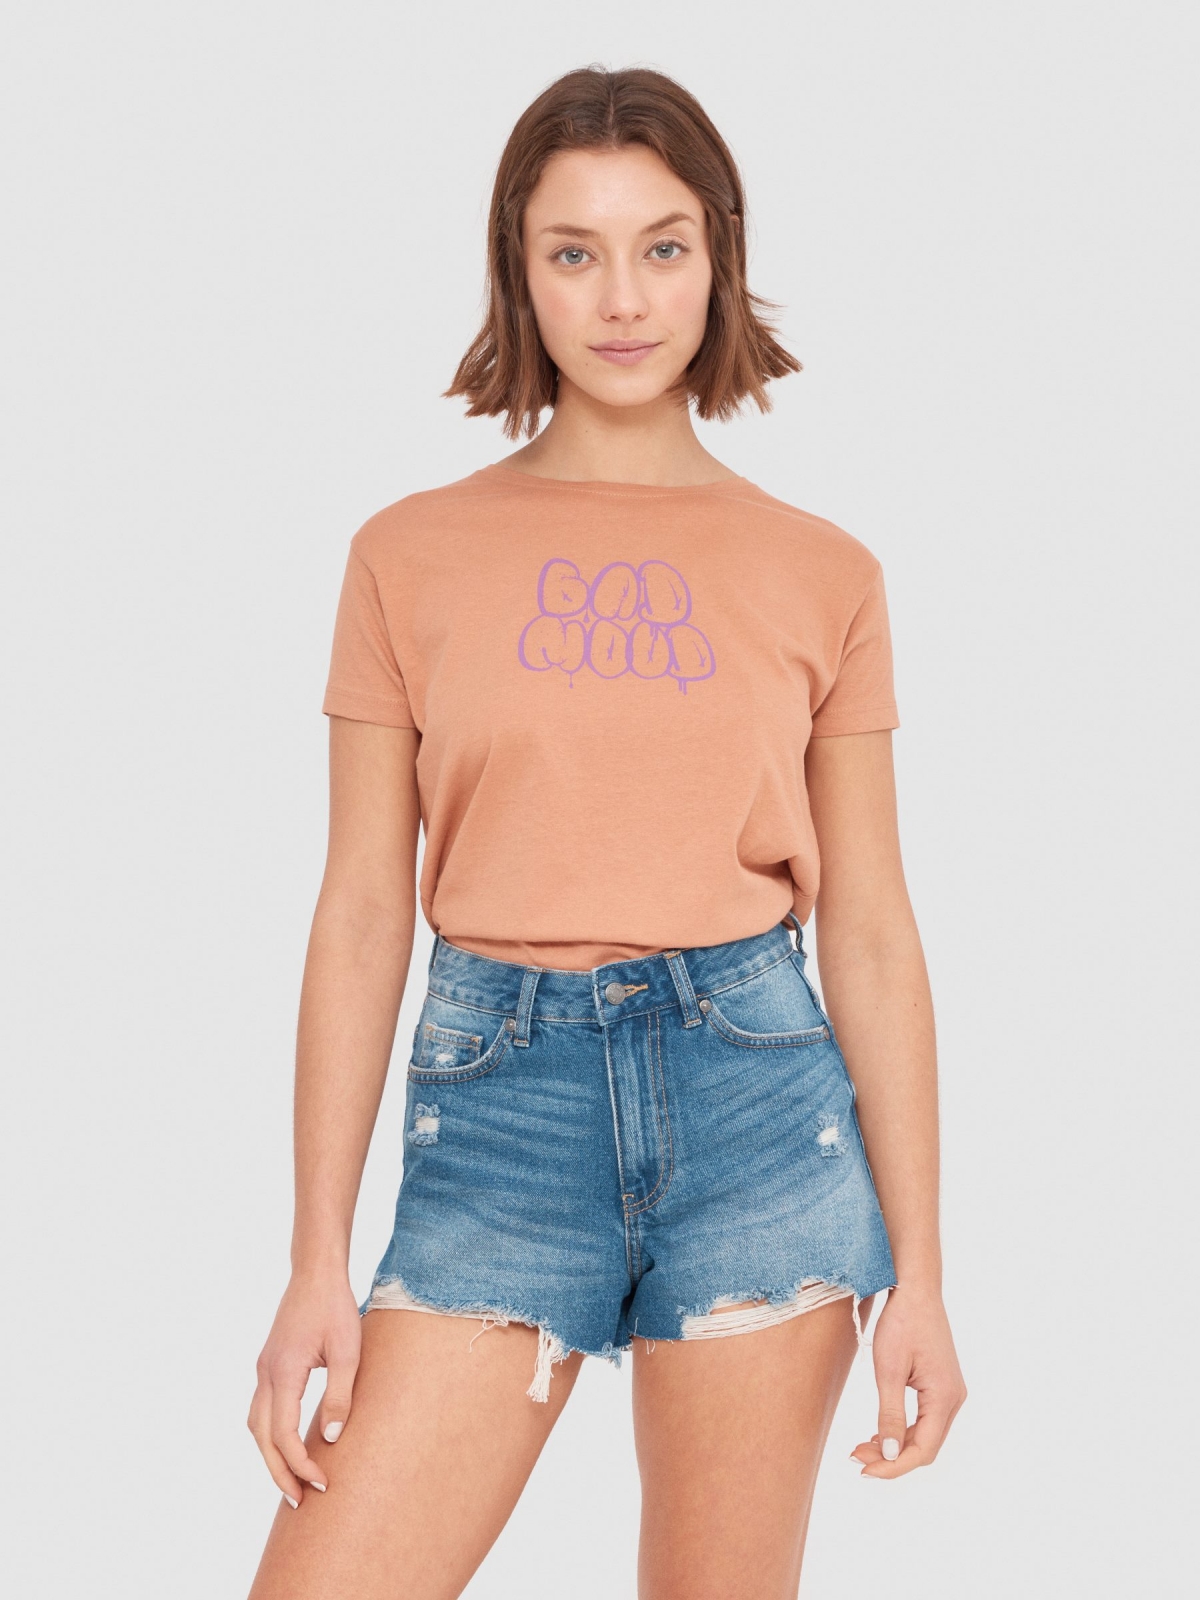 Bad Mood t-shirt light brown middle front view